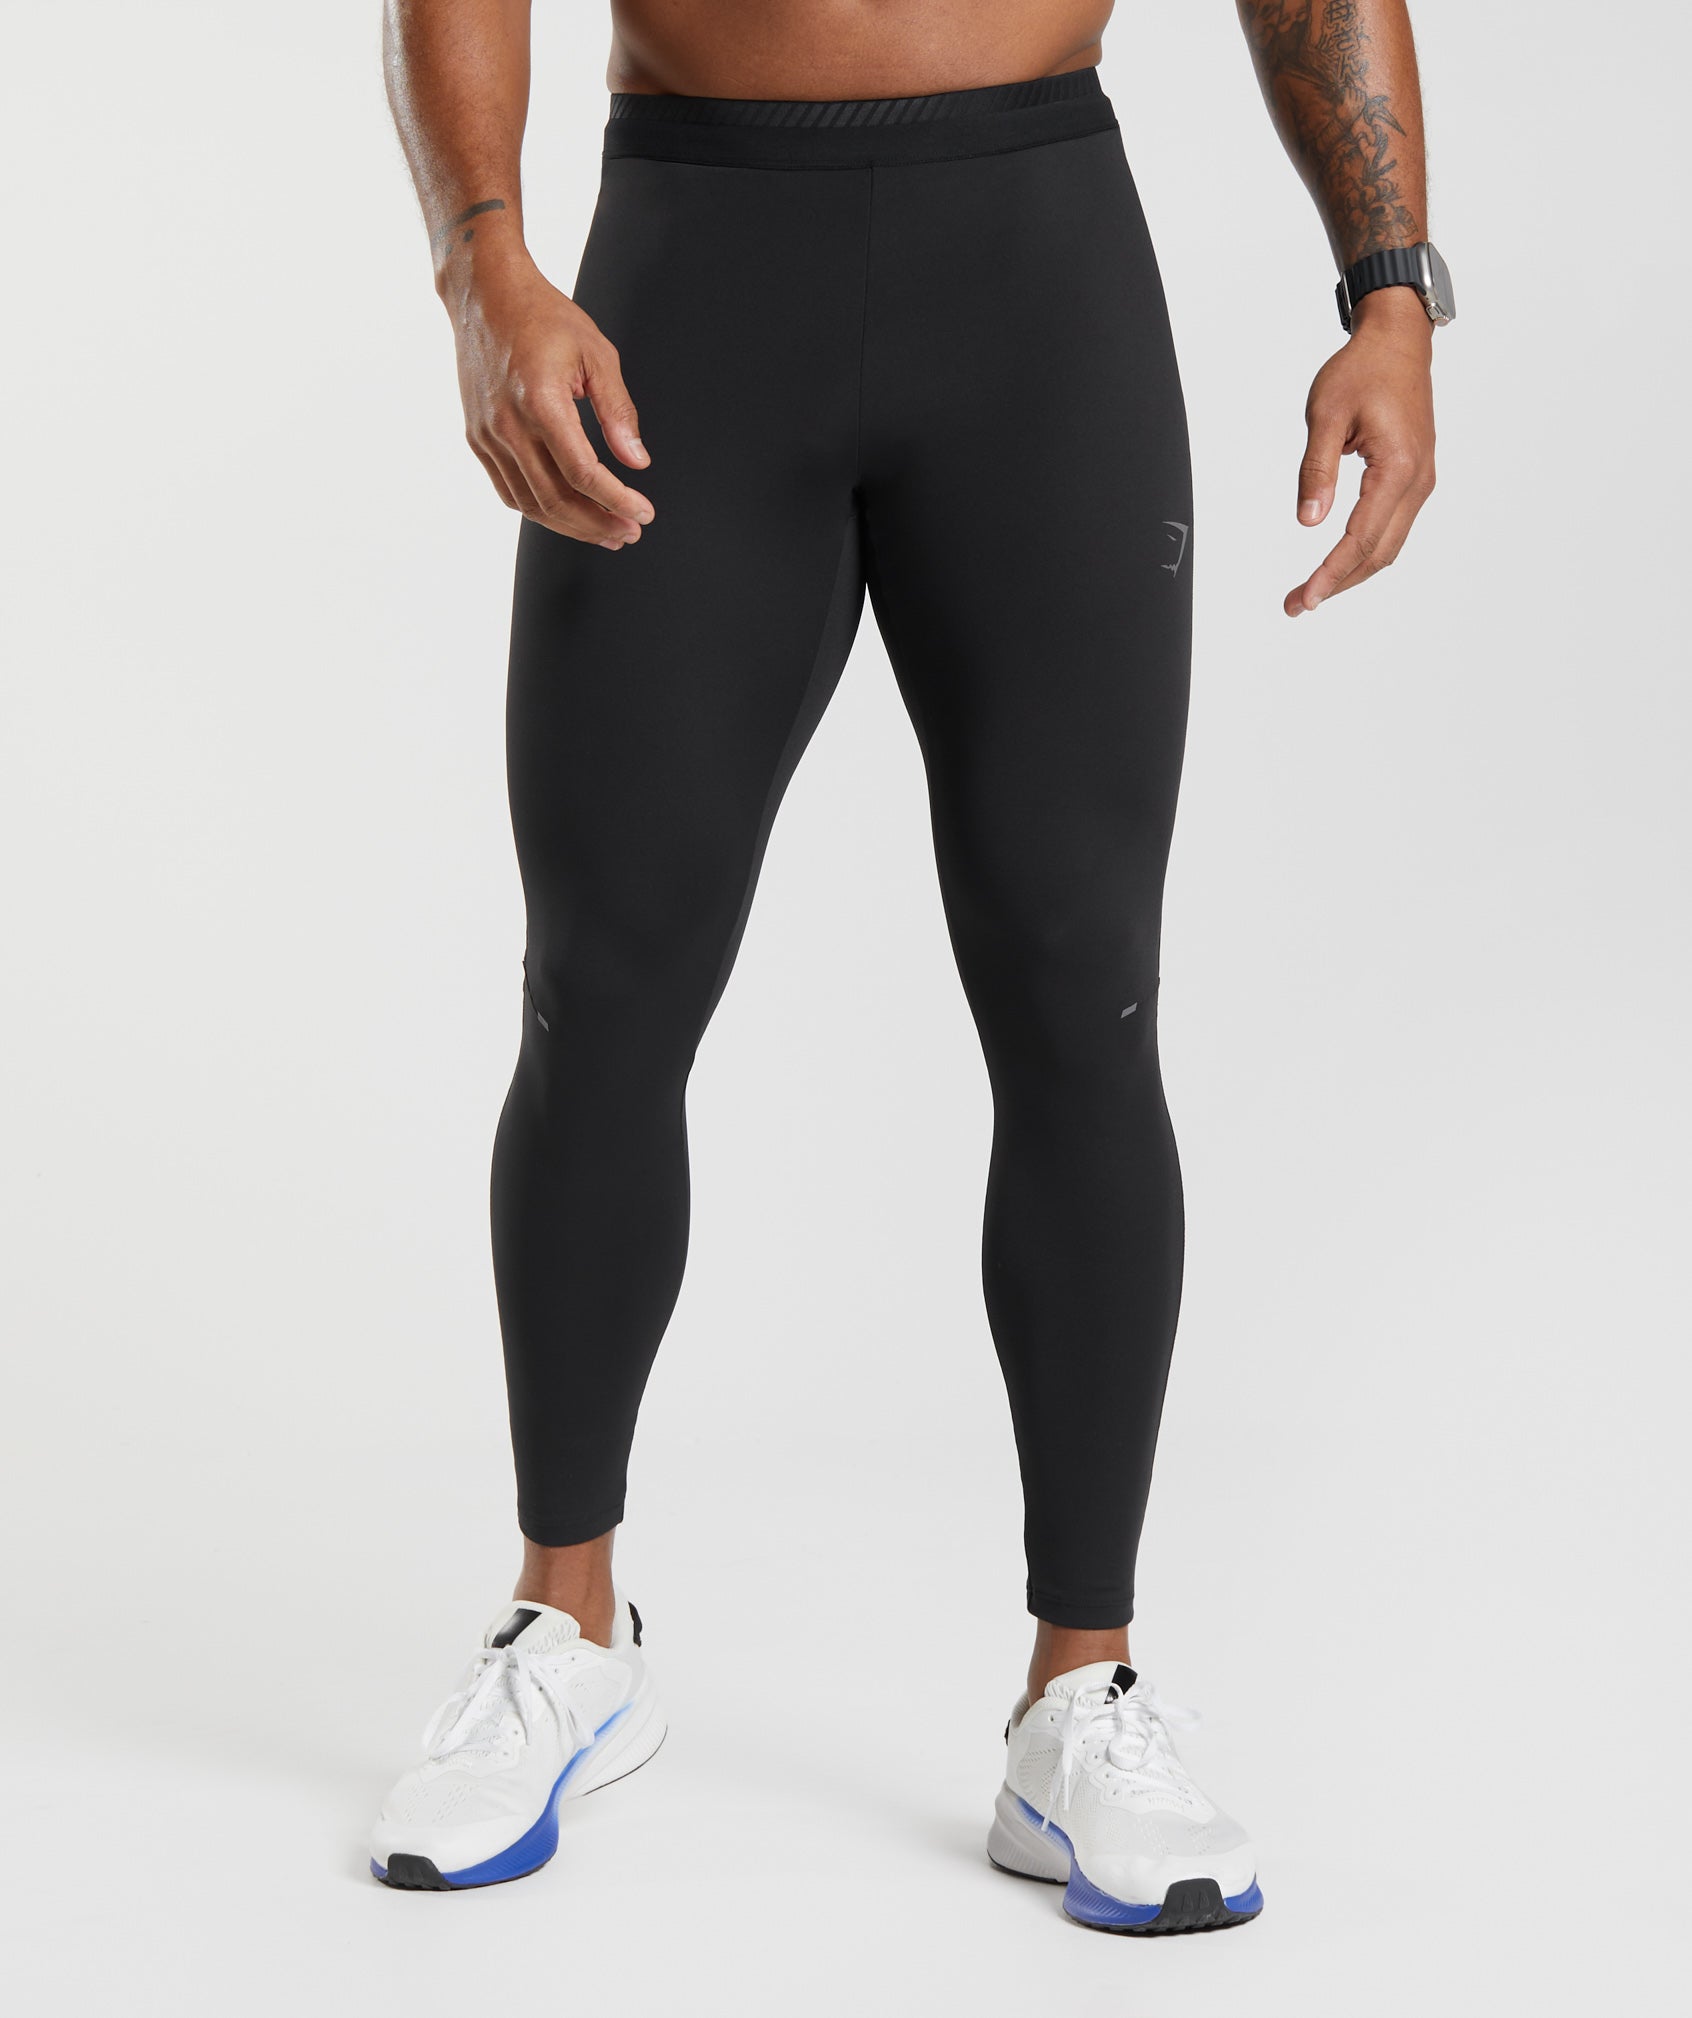 Best men's running tights: From Adidas to New Balance | The Independent